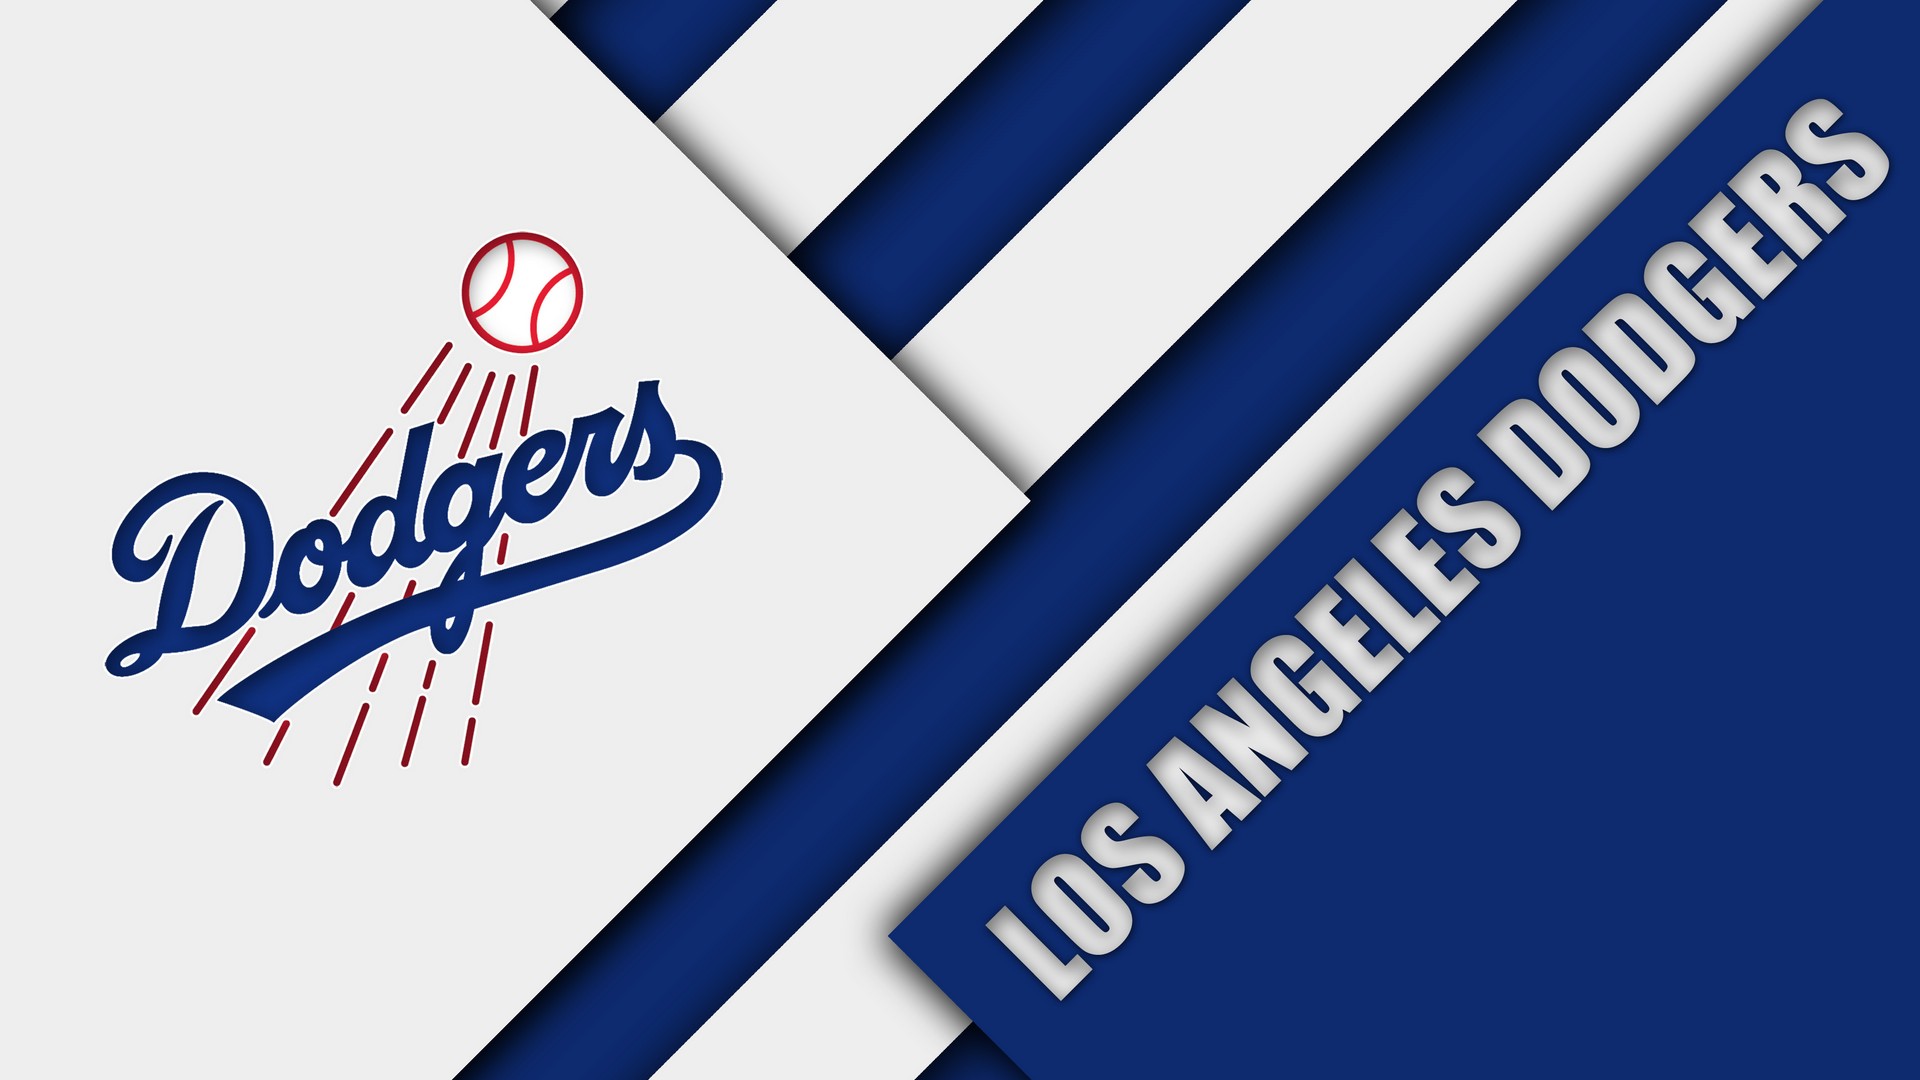 Los Angeles Dodgers Wallpaper with high-resolution 1920x1080 pixel. You can use this wallpaper for Mac Desktop Wallpaper, Laptop Screensavers, Android Wallpapers, Tablet or iPhone Home Screen and another mobile phone device